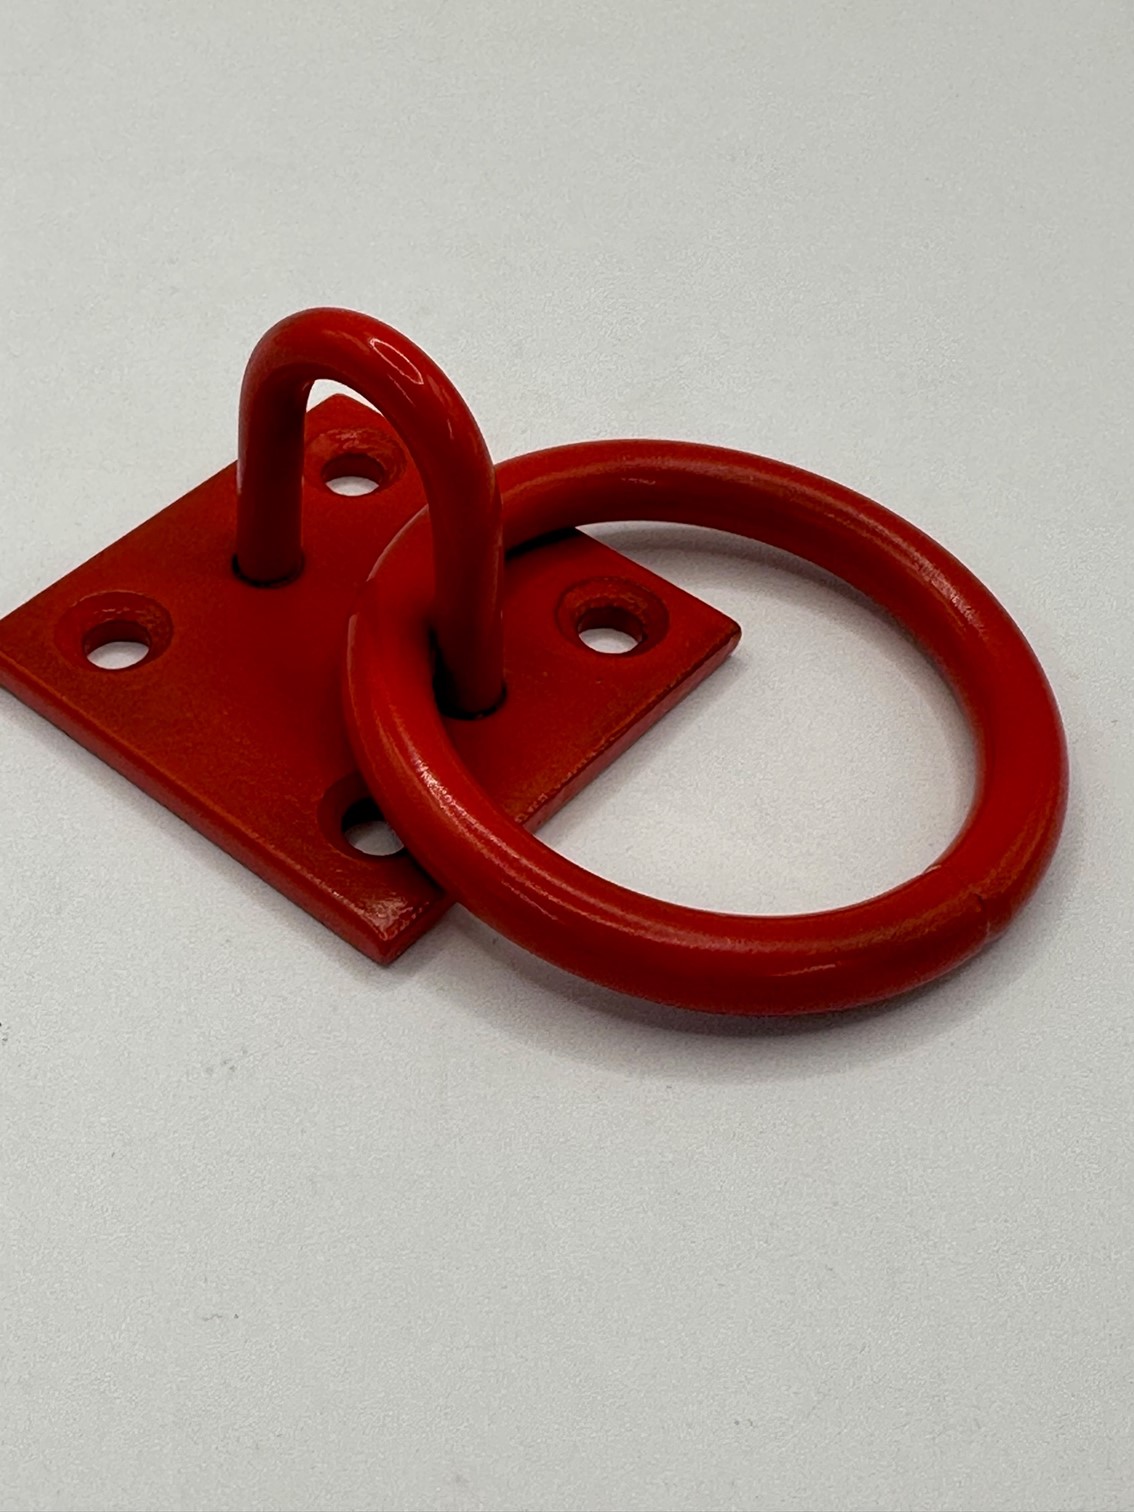 Red Powder Coated Ring on Plate